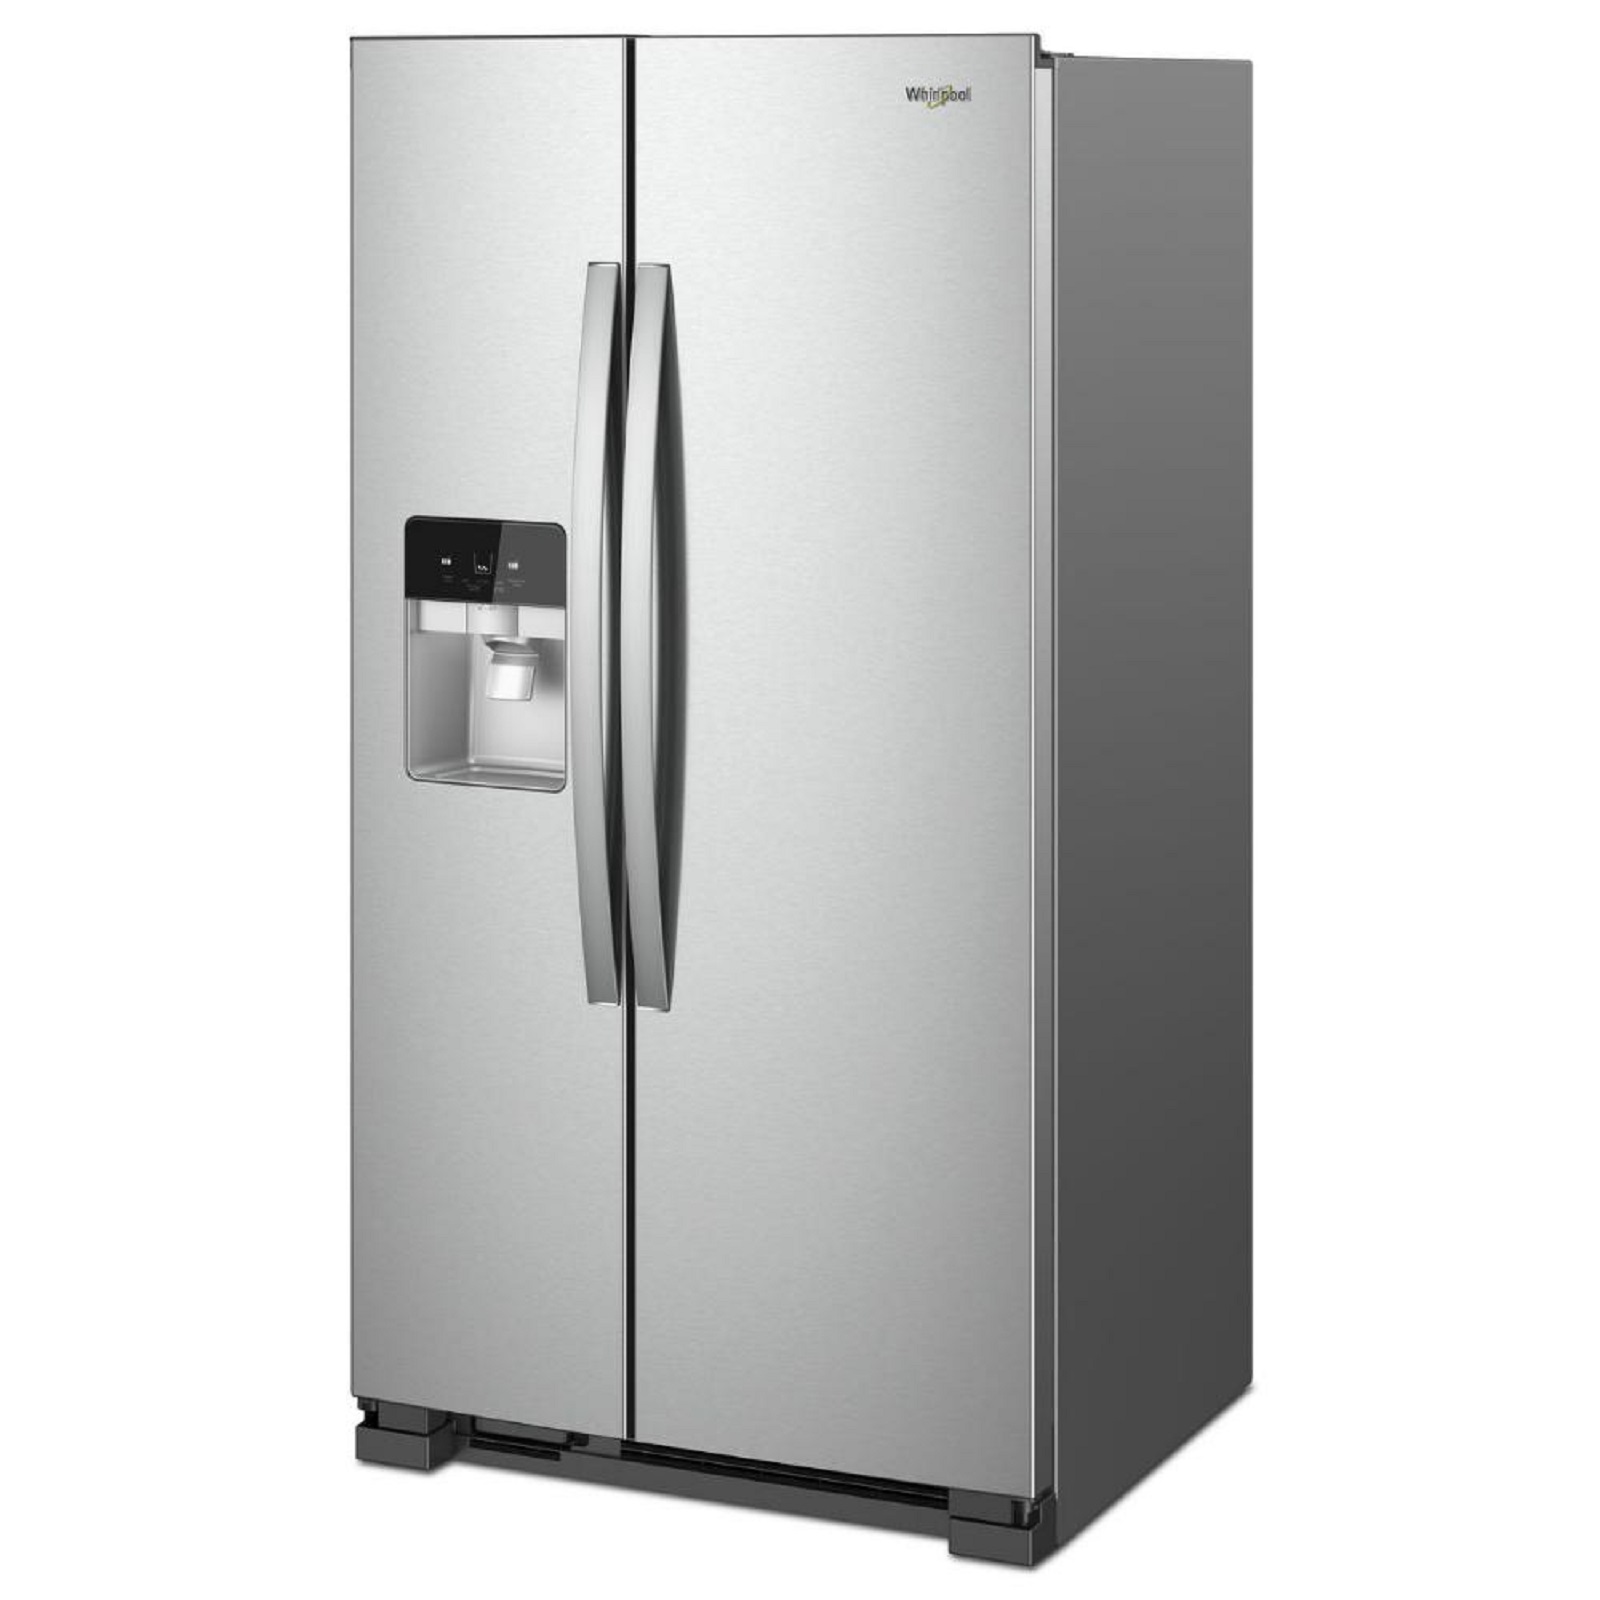 Whirlpool Side By Side Stainless Steel Refrigerator